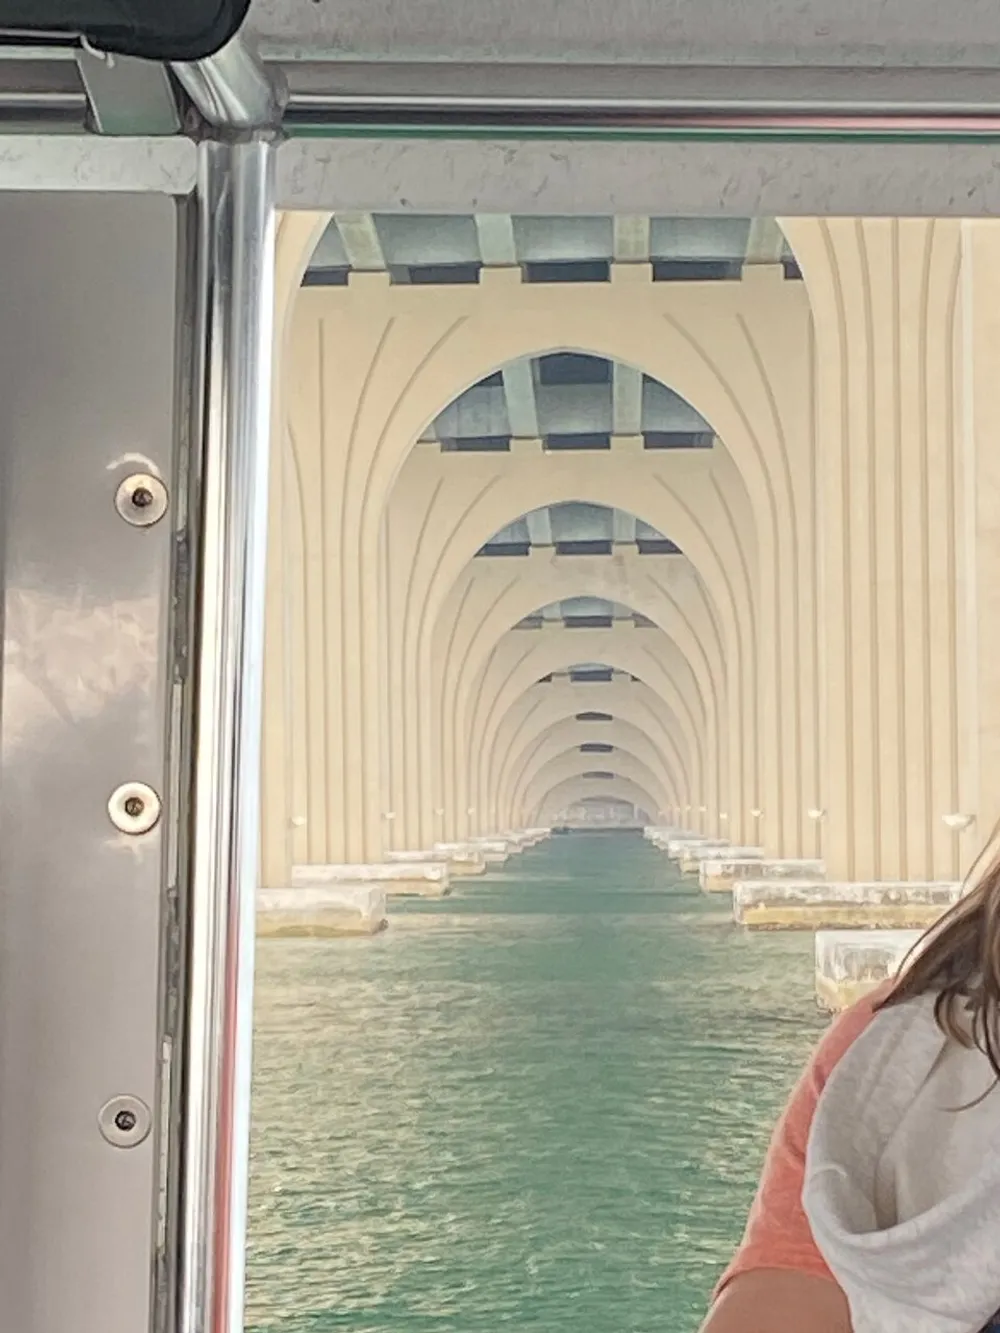 The image shows the underbelly of a bridge taken from a boat revealing a vanishing point perspective of repetitive structural arches over water with part of a person visible on the right